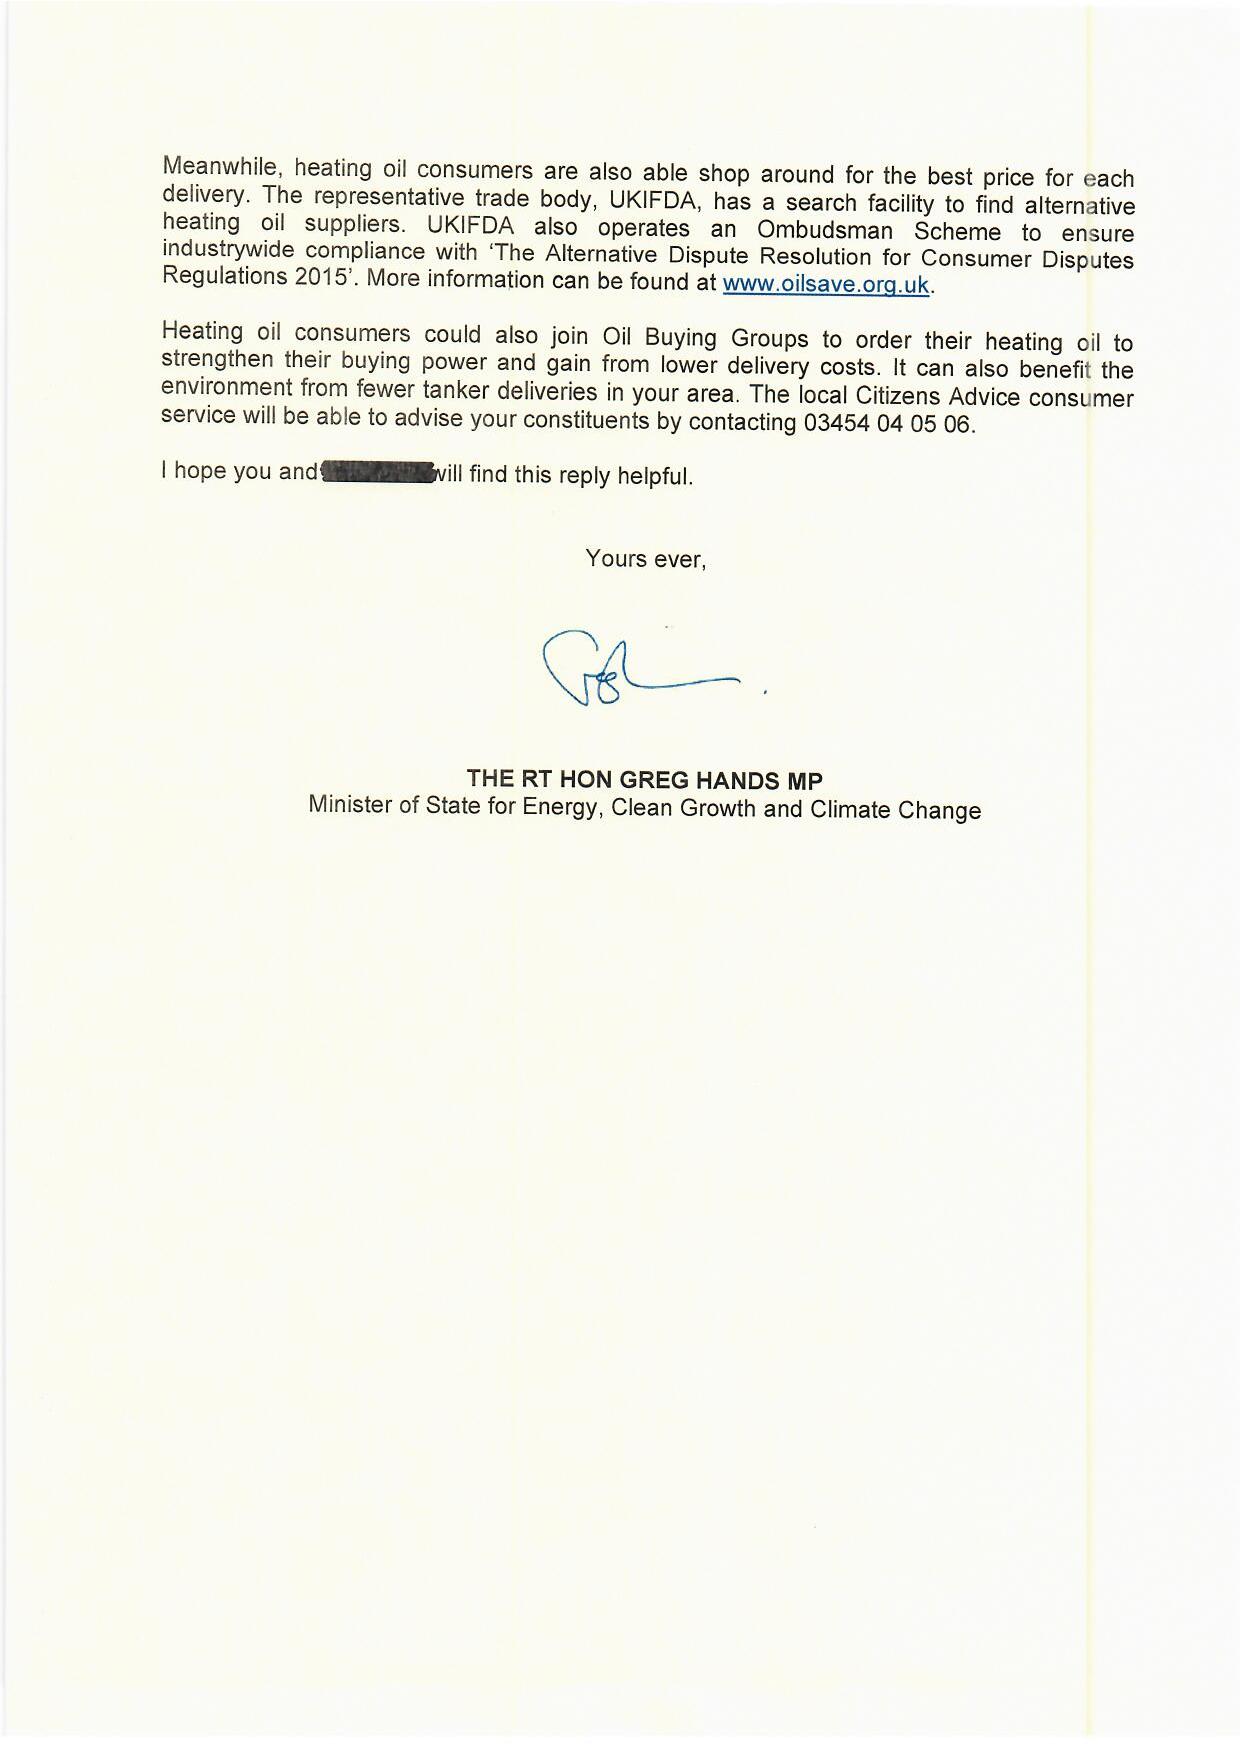 Heating Oil Response from Minister Greg Hands MP 2